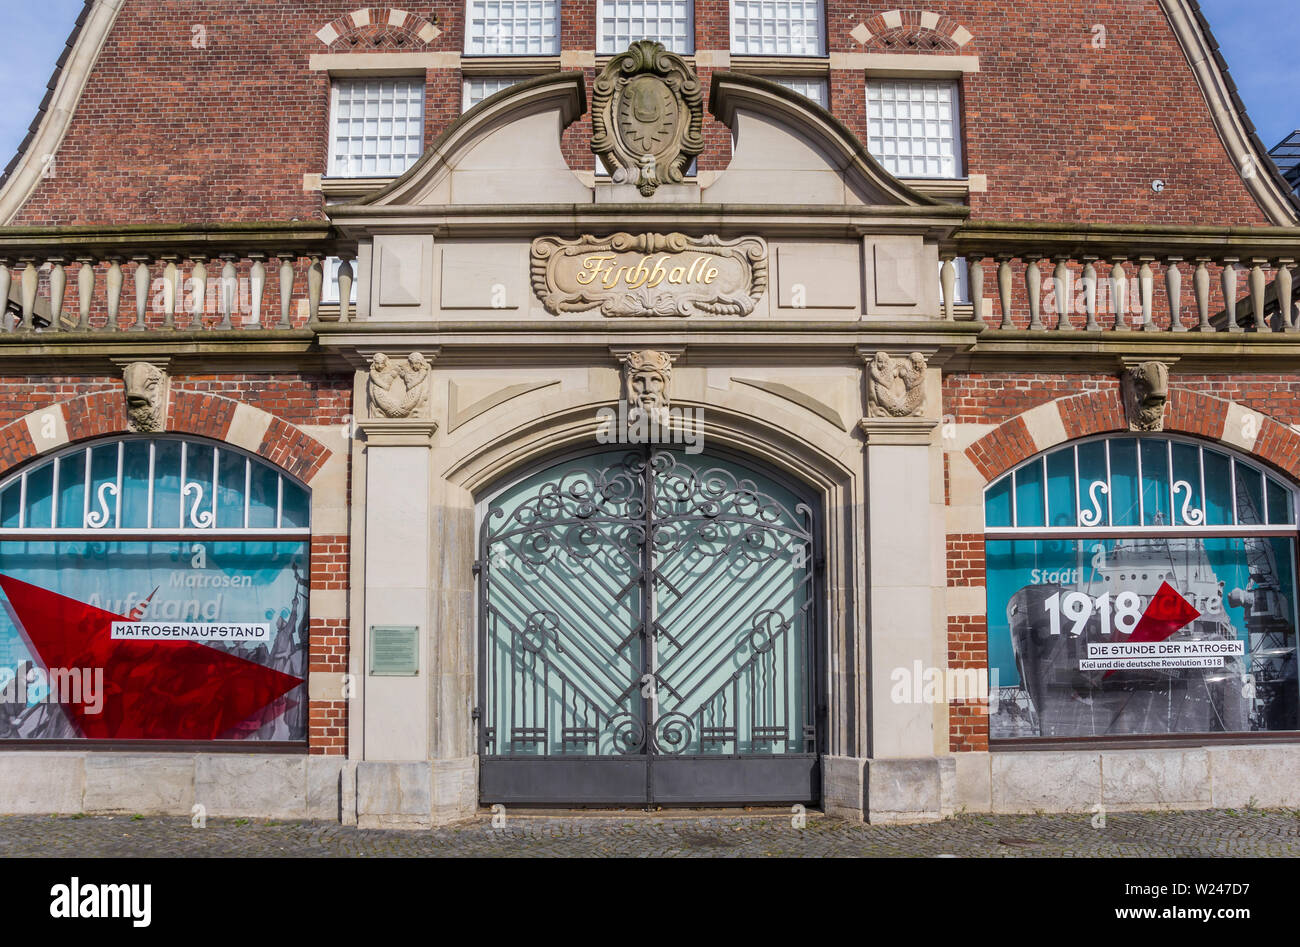 Facade of the maritime museum in Kiel, Germany Stock Photo